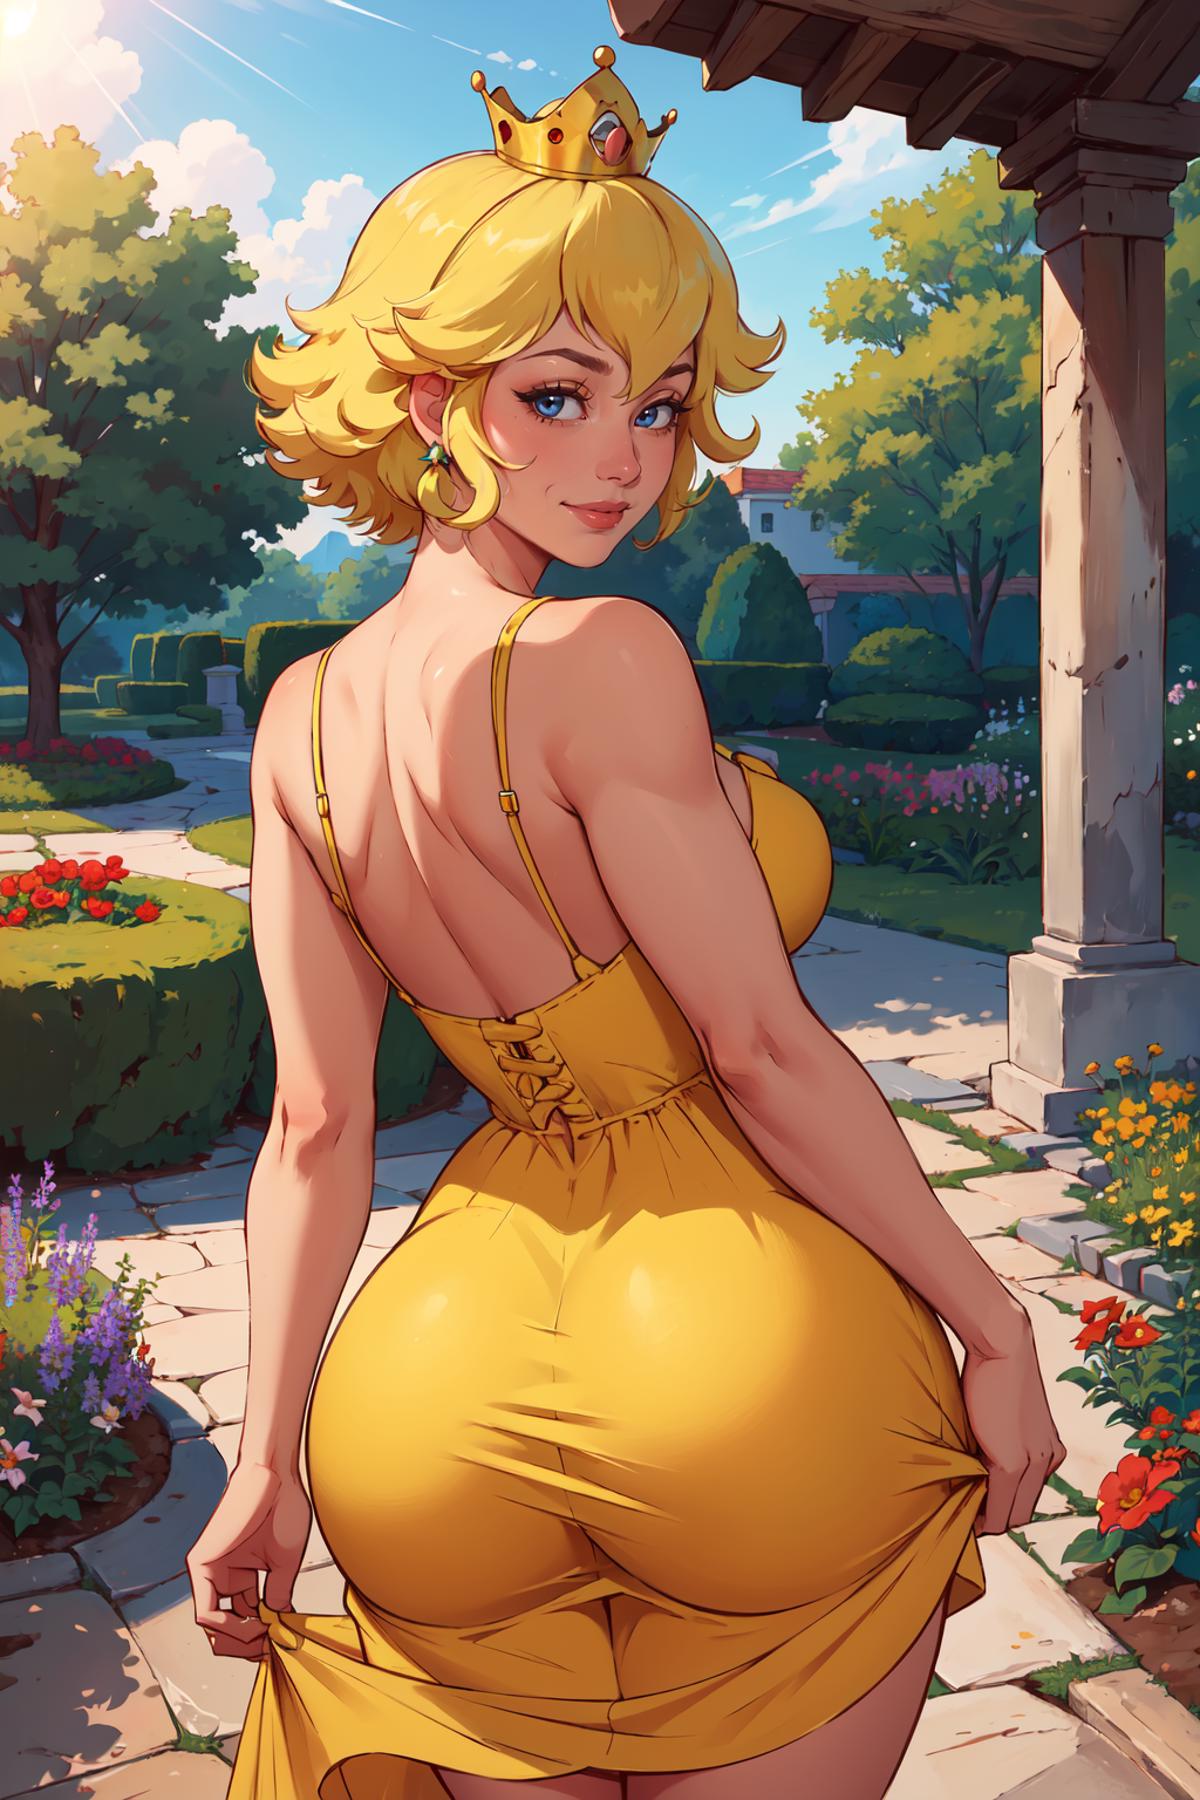 A Cartoon Illustration of a Blonde Woman in a Yellow Dress Standing in a Garden.